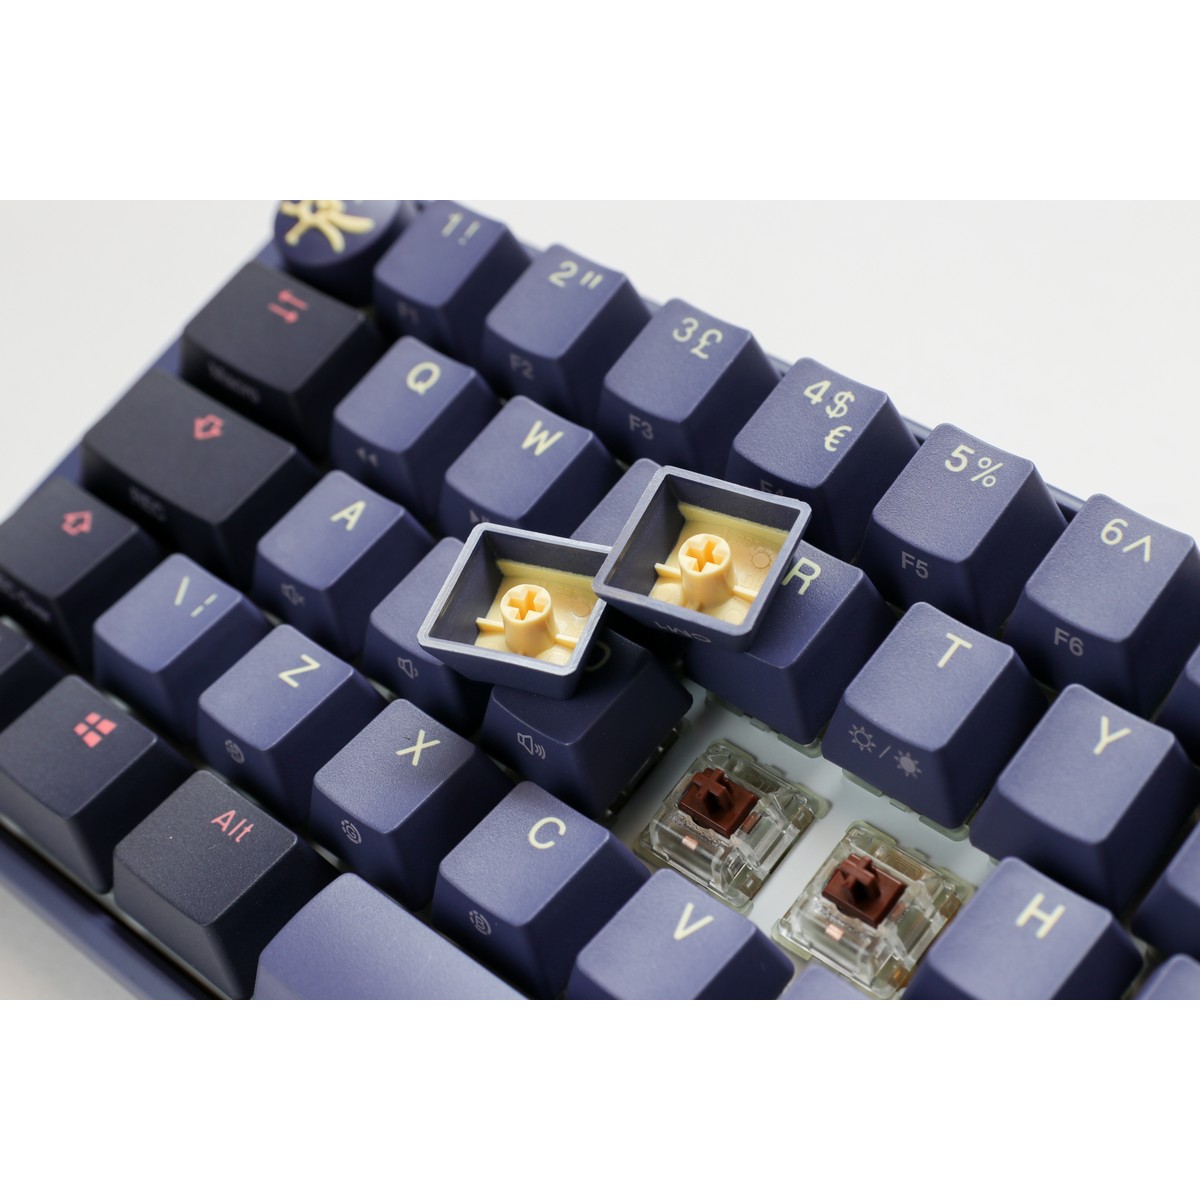 Ducky - Ducky One 3 Cosmic SF 65% USB RGB Mechanical Gaming Keyboard Cherry MX Red Switch - UK Layout